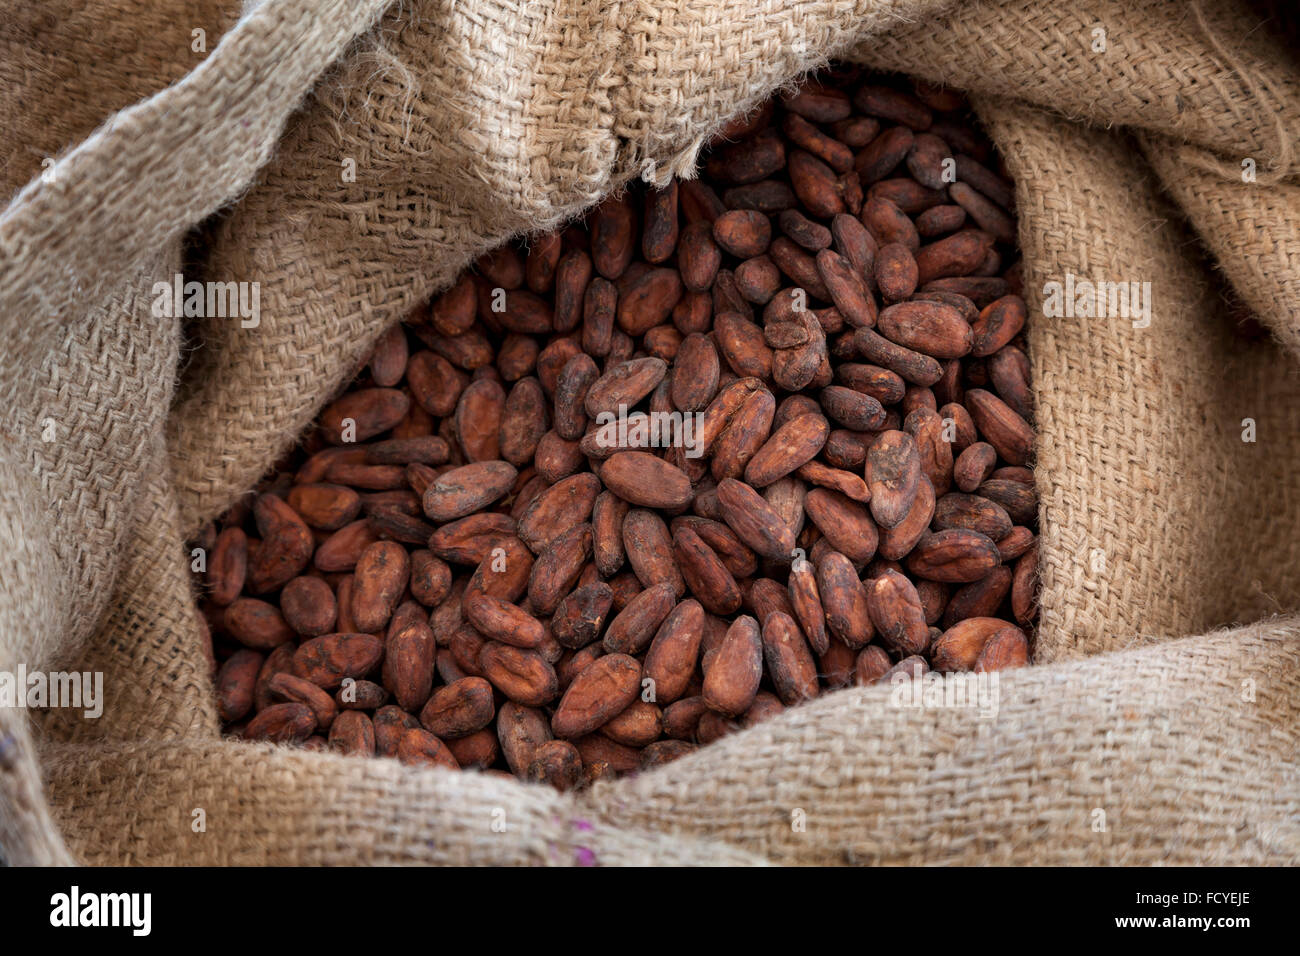 Sack Of Cacao High Resolution Stock Photography and Images - Alamy